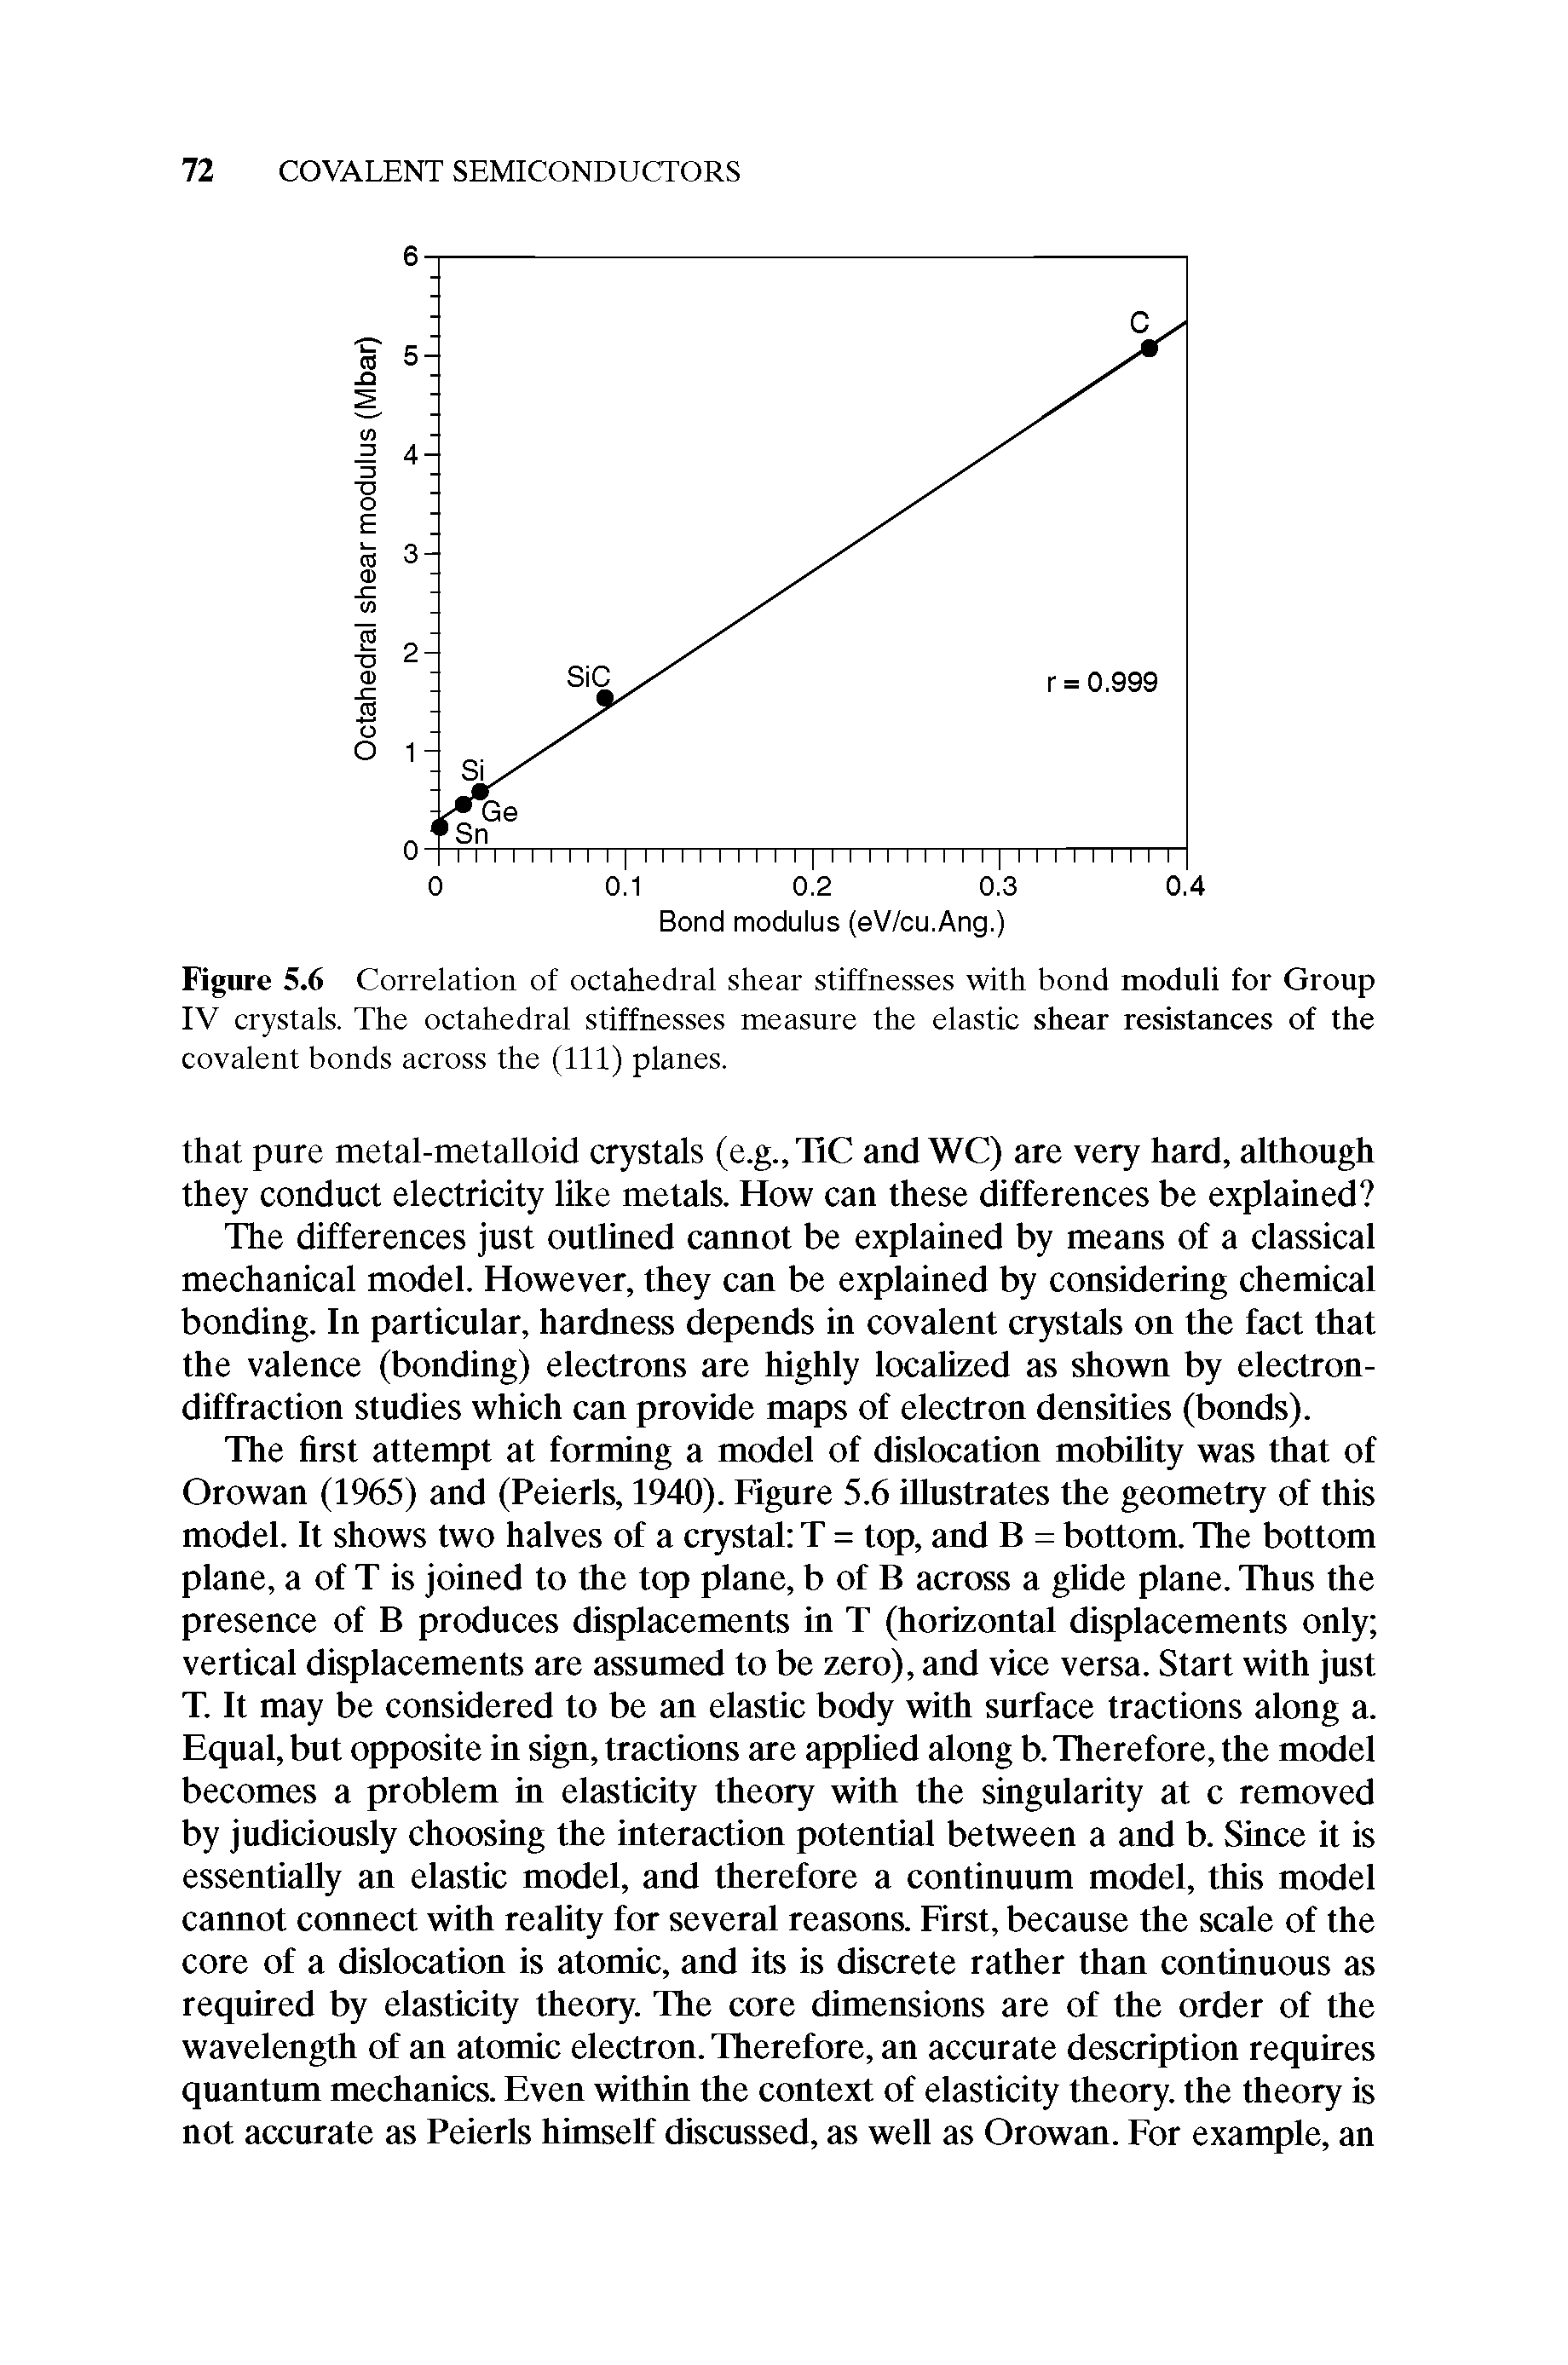 Figure 5.6 Correlation of octahedral shear stiffnesses with bond moduli for Group IV crystals. The octahedral stiffnesses measure the elastic shear resistances of the covalent bonds across the (111) planes.